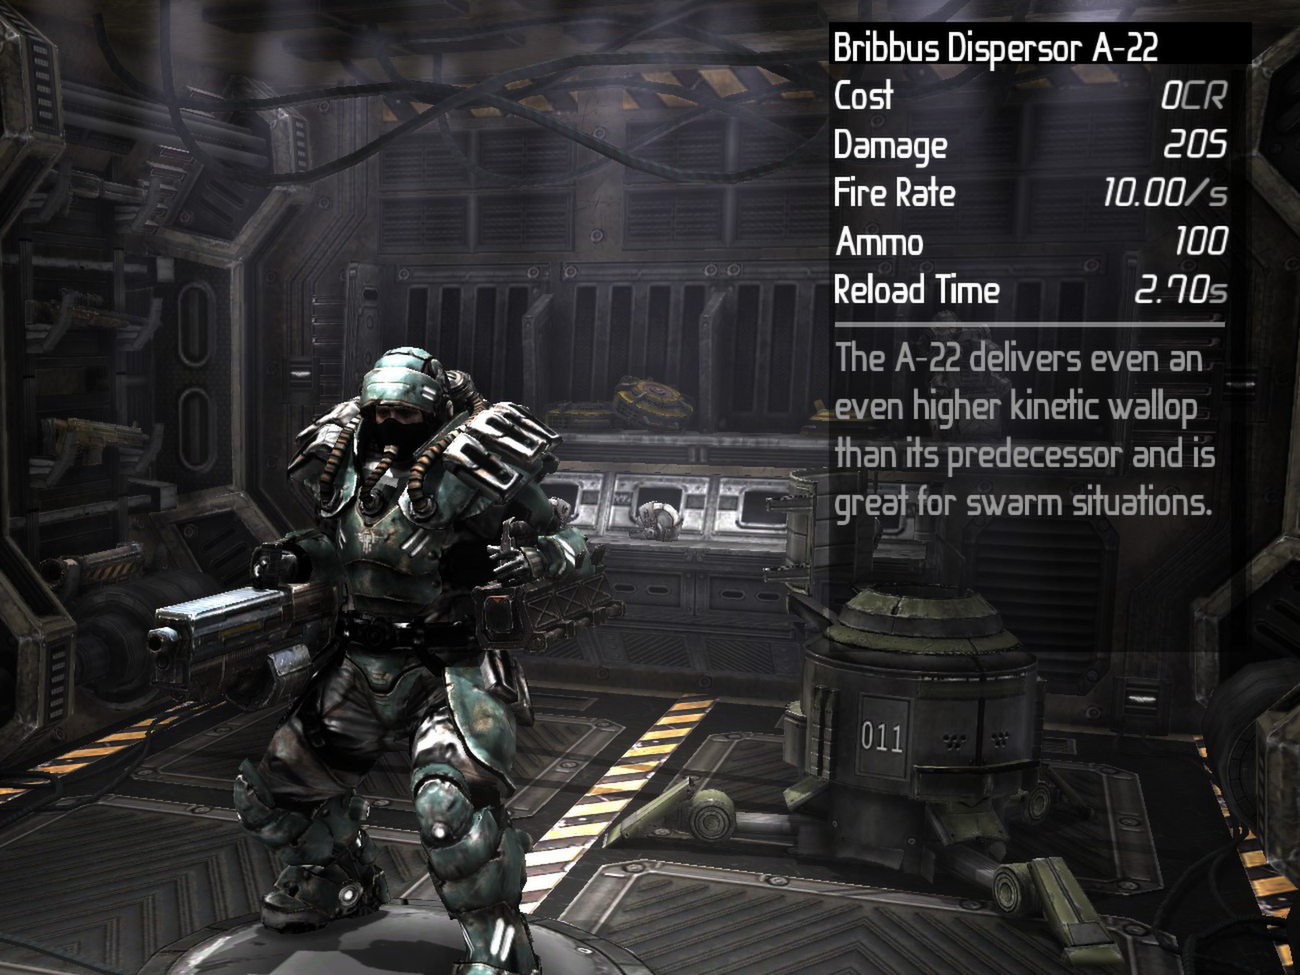 Earth Defense Force Battle Armor Weapon Chest Featured Screenshot #1